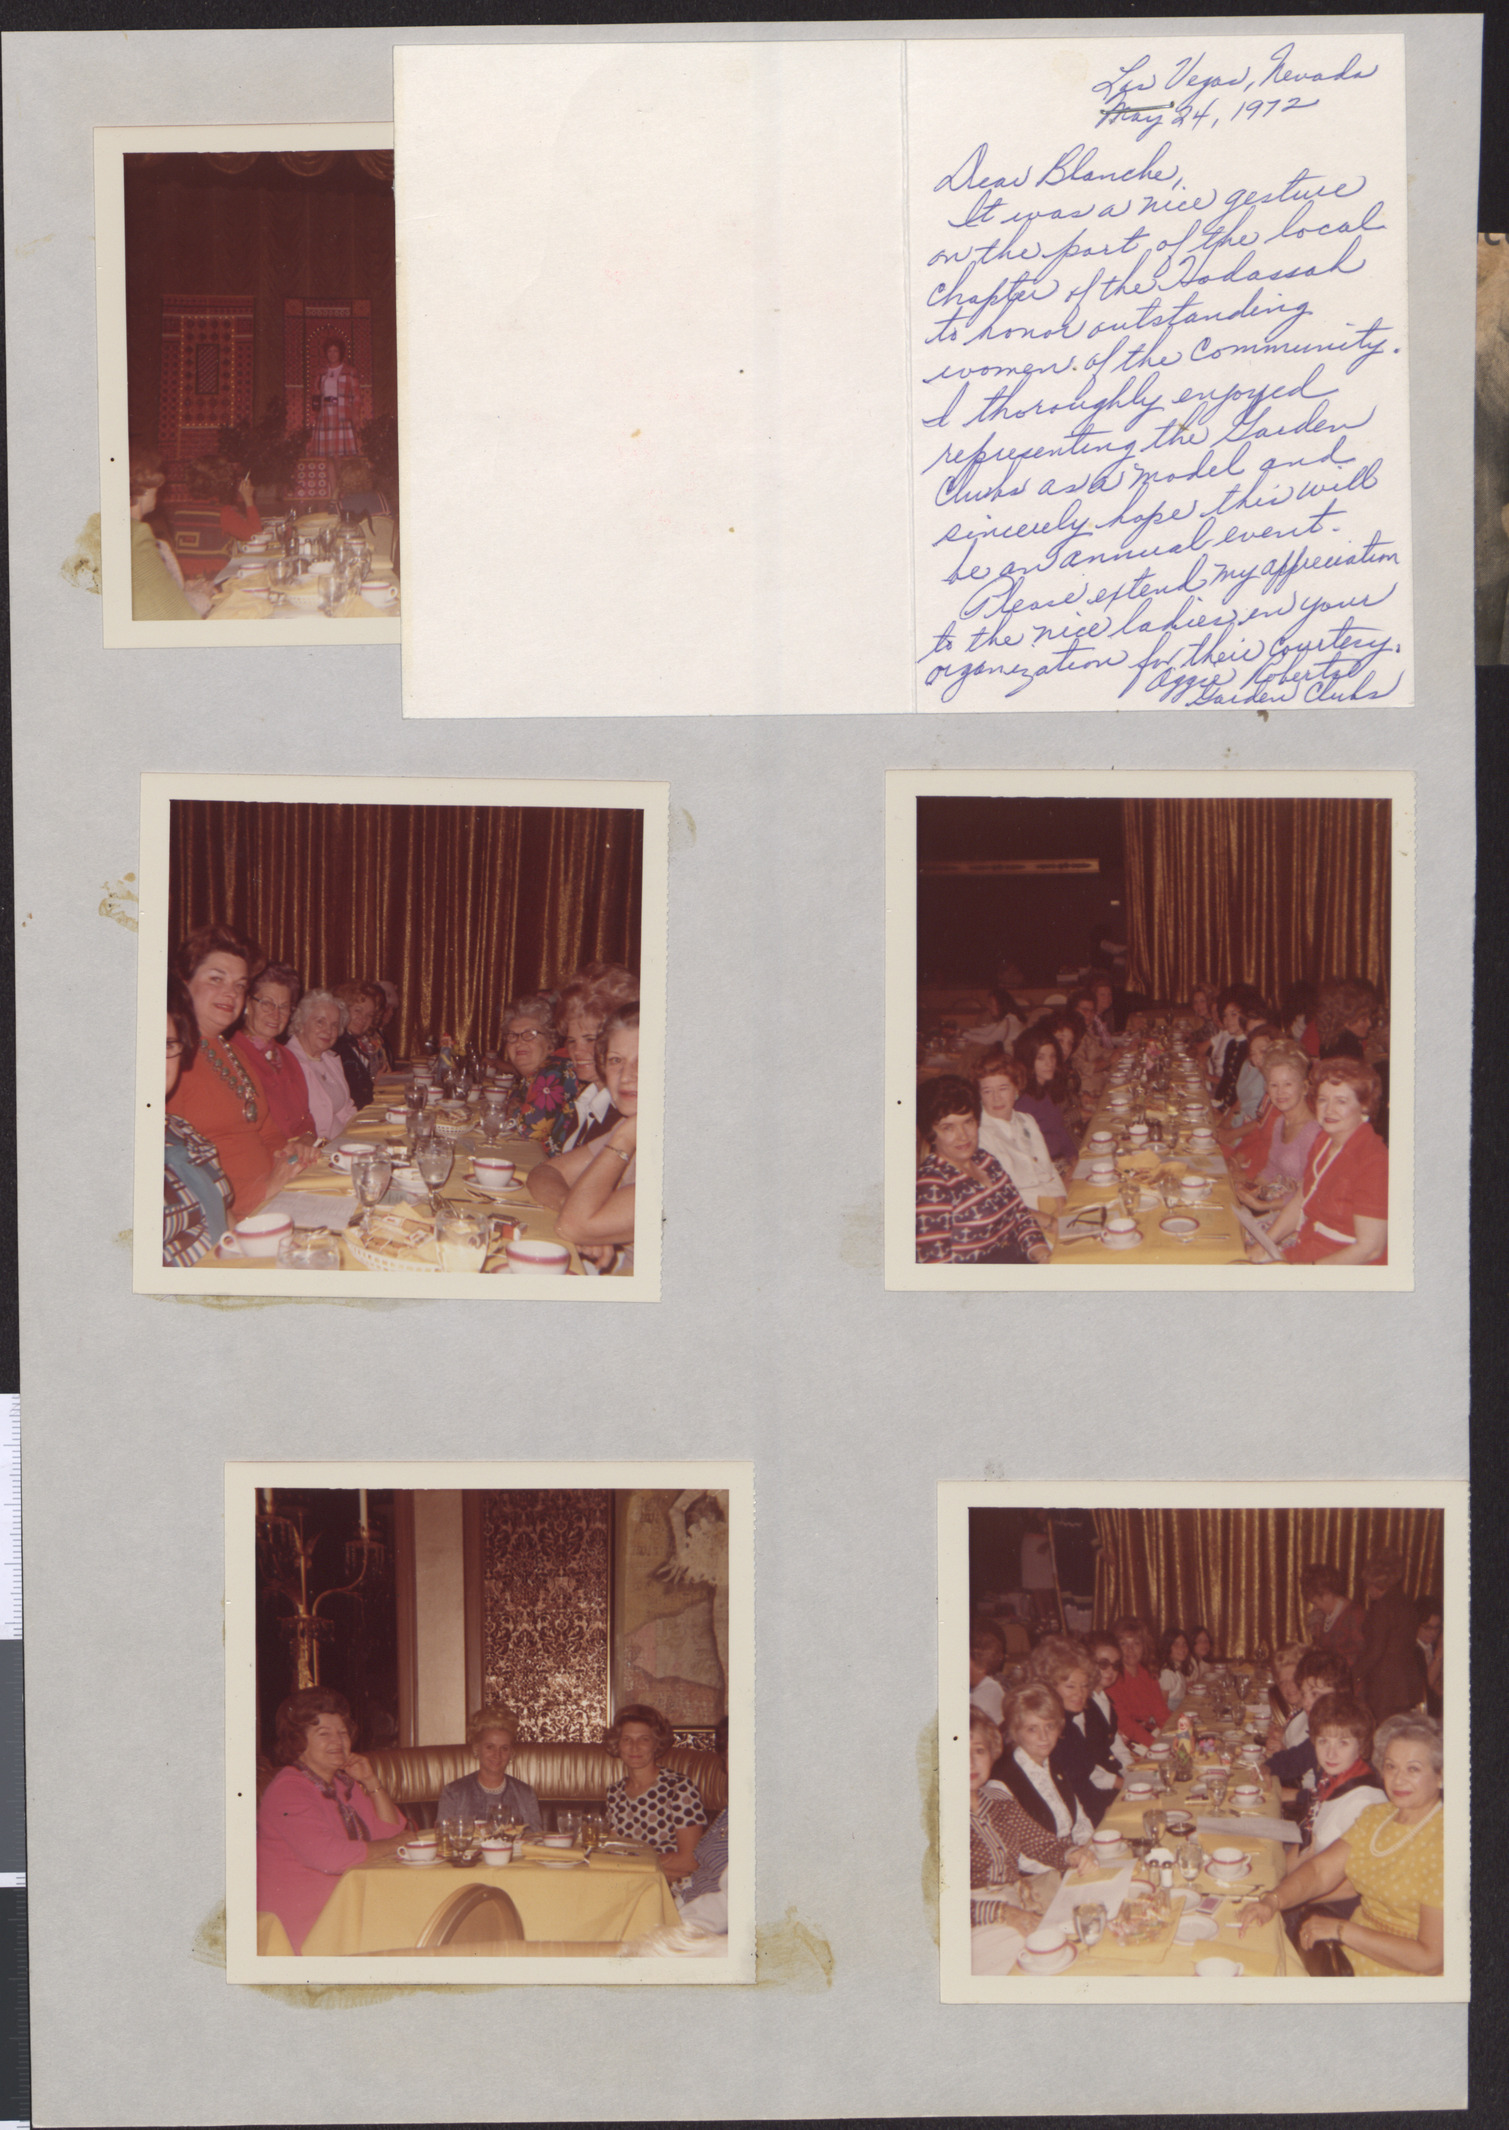 Greeting card from Aggie Roberts to Blanche Stein (Las Vegas, Nev.), May 24, 1972